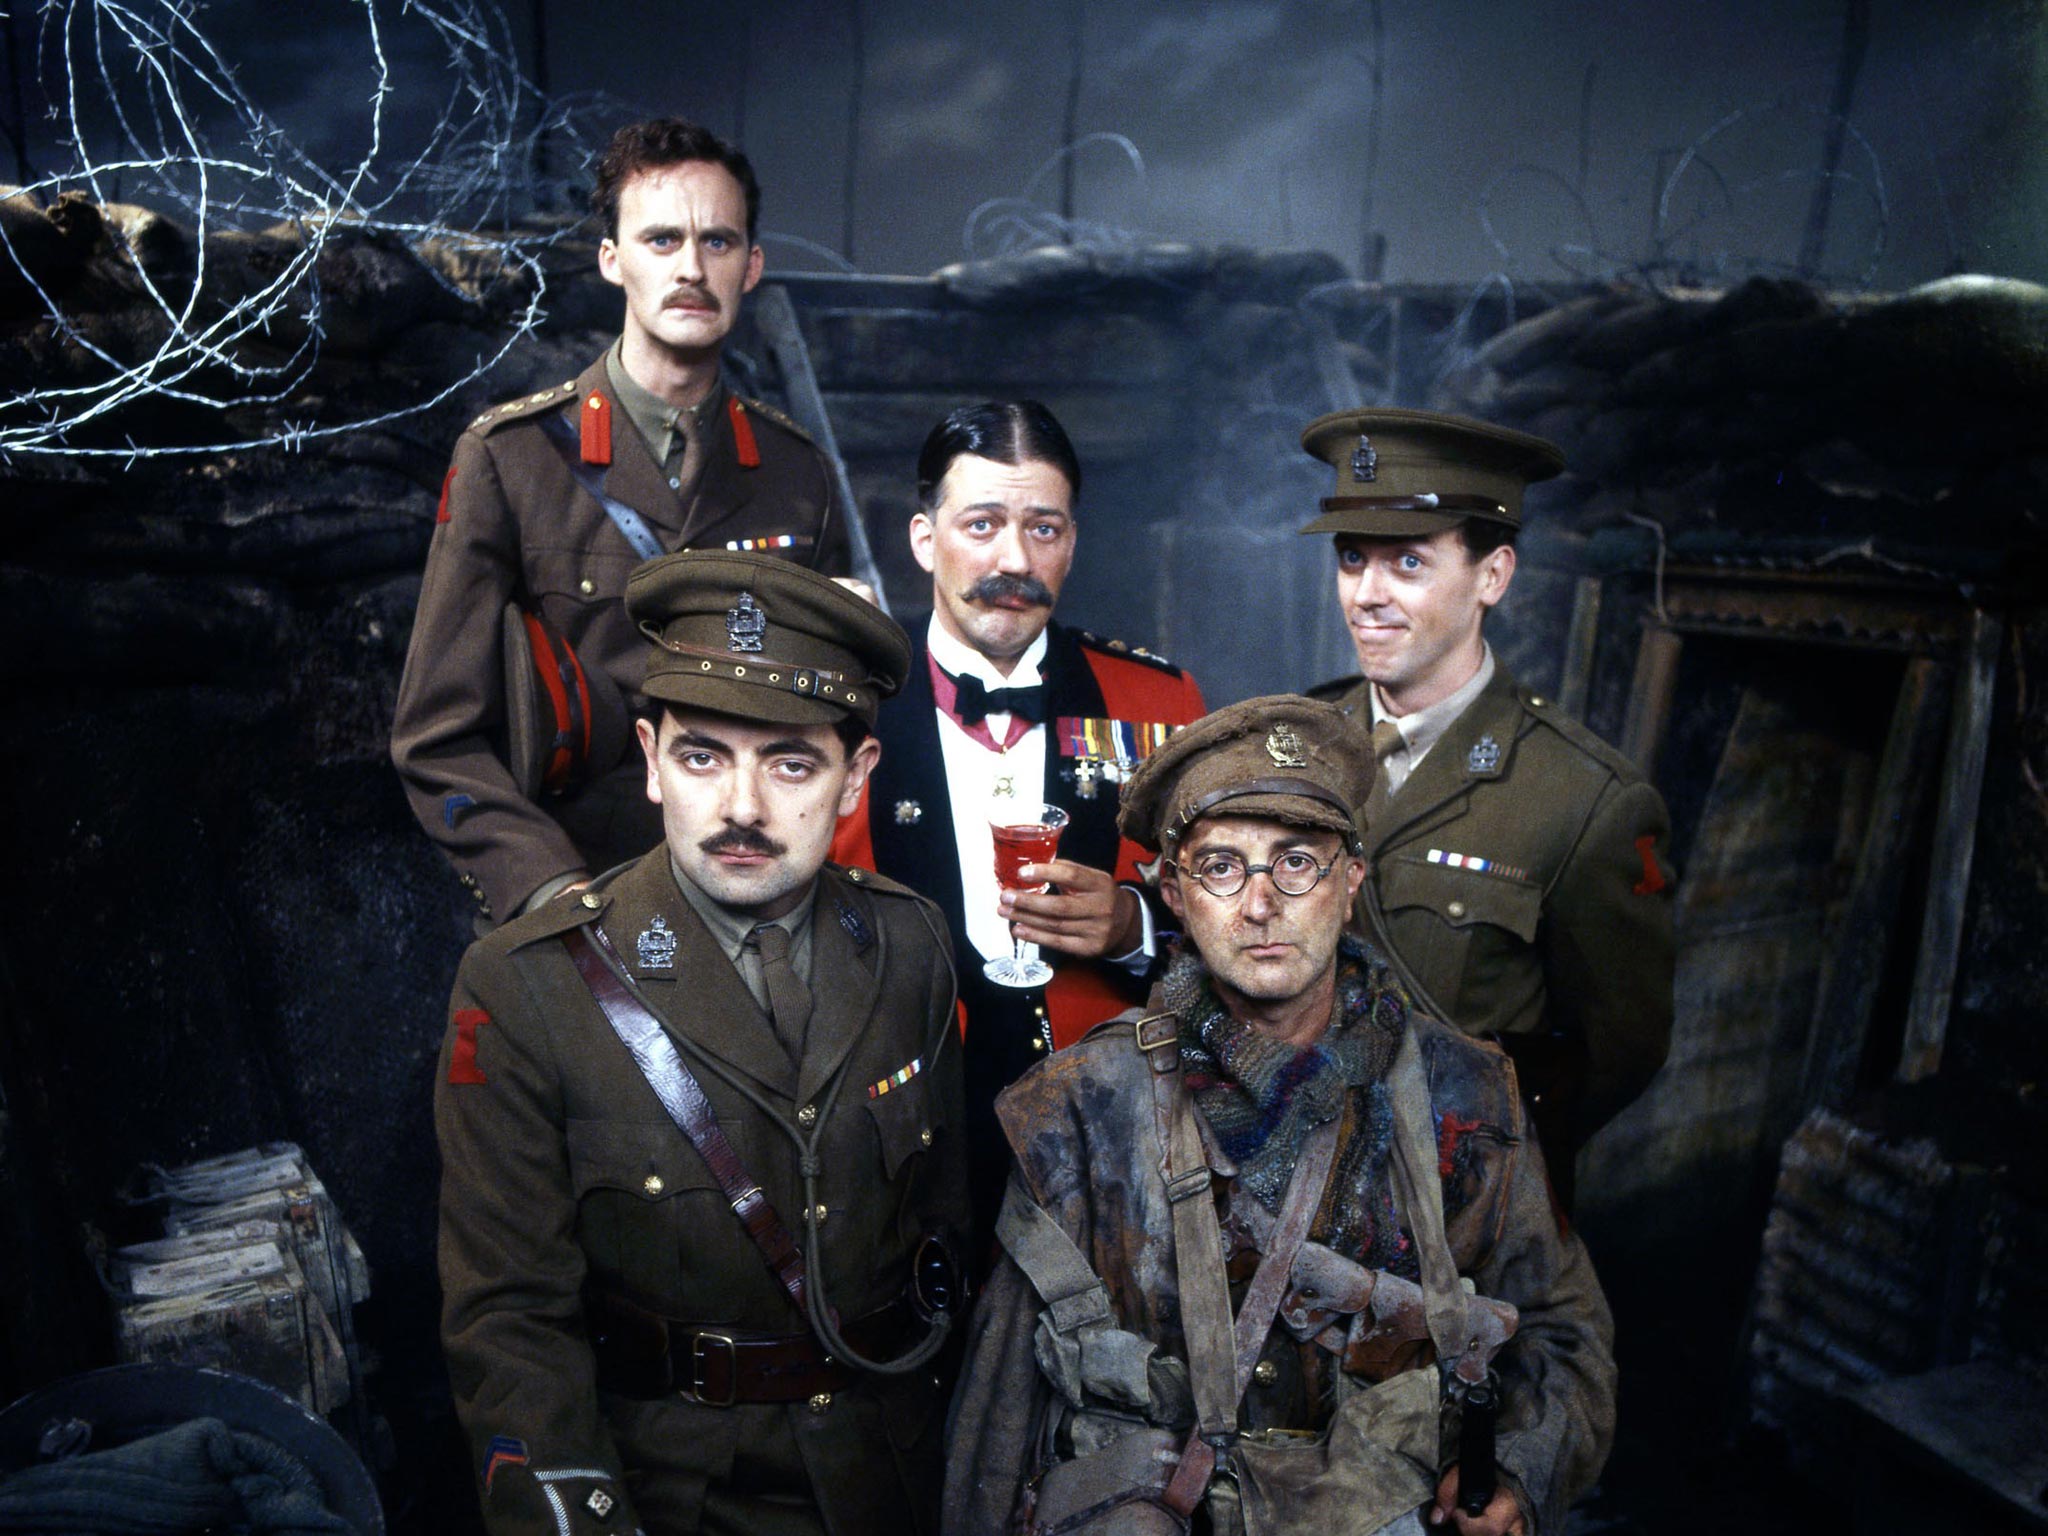 The cast of 'Blackadder Goes Forth'